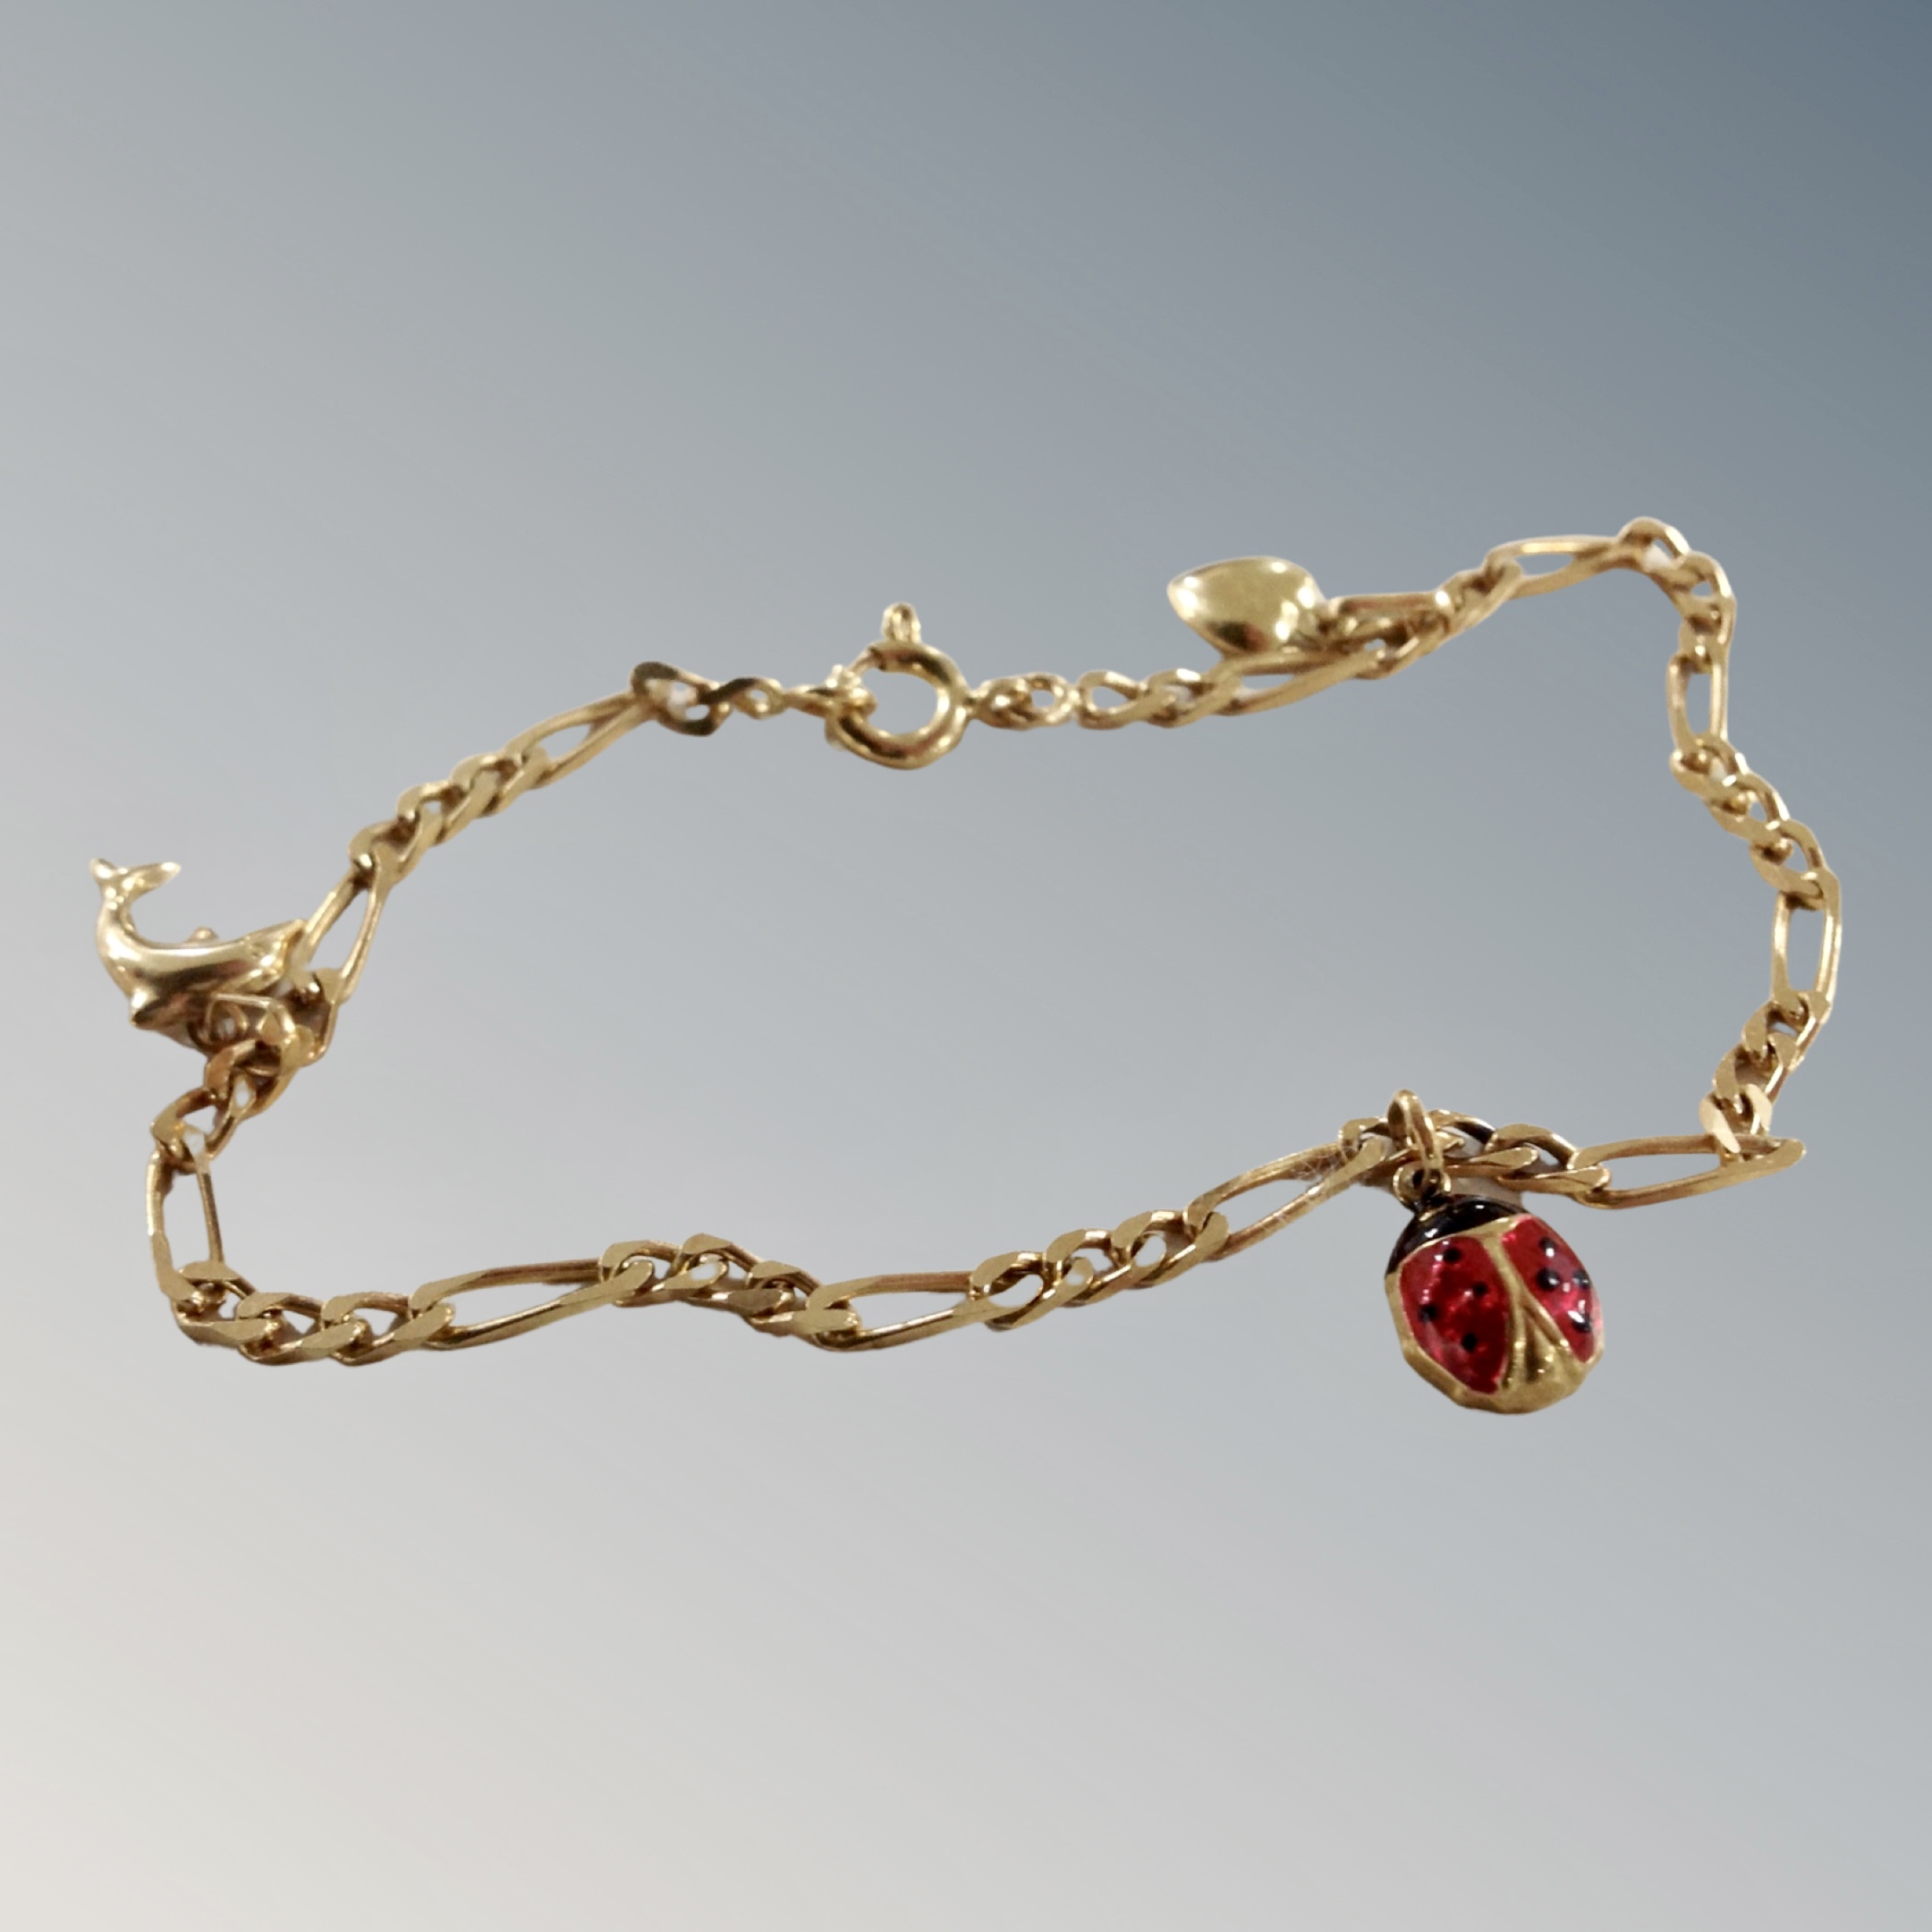 An 18ct gold charm bracelet with charms of ladybird, heart and dolphin, 4g.